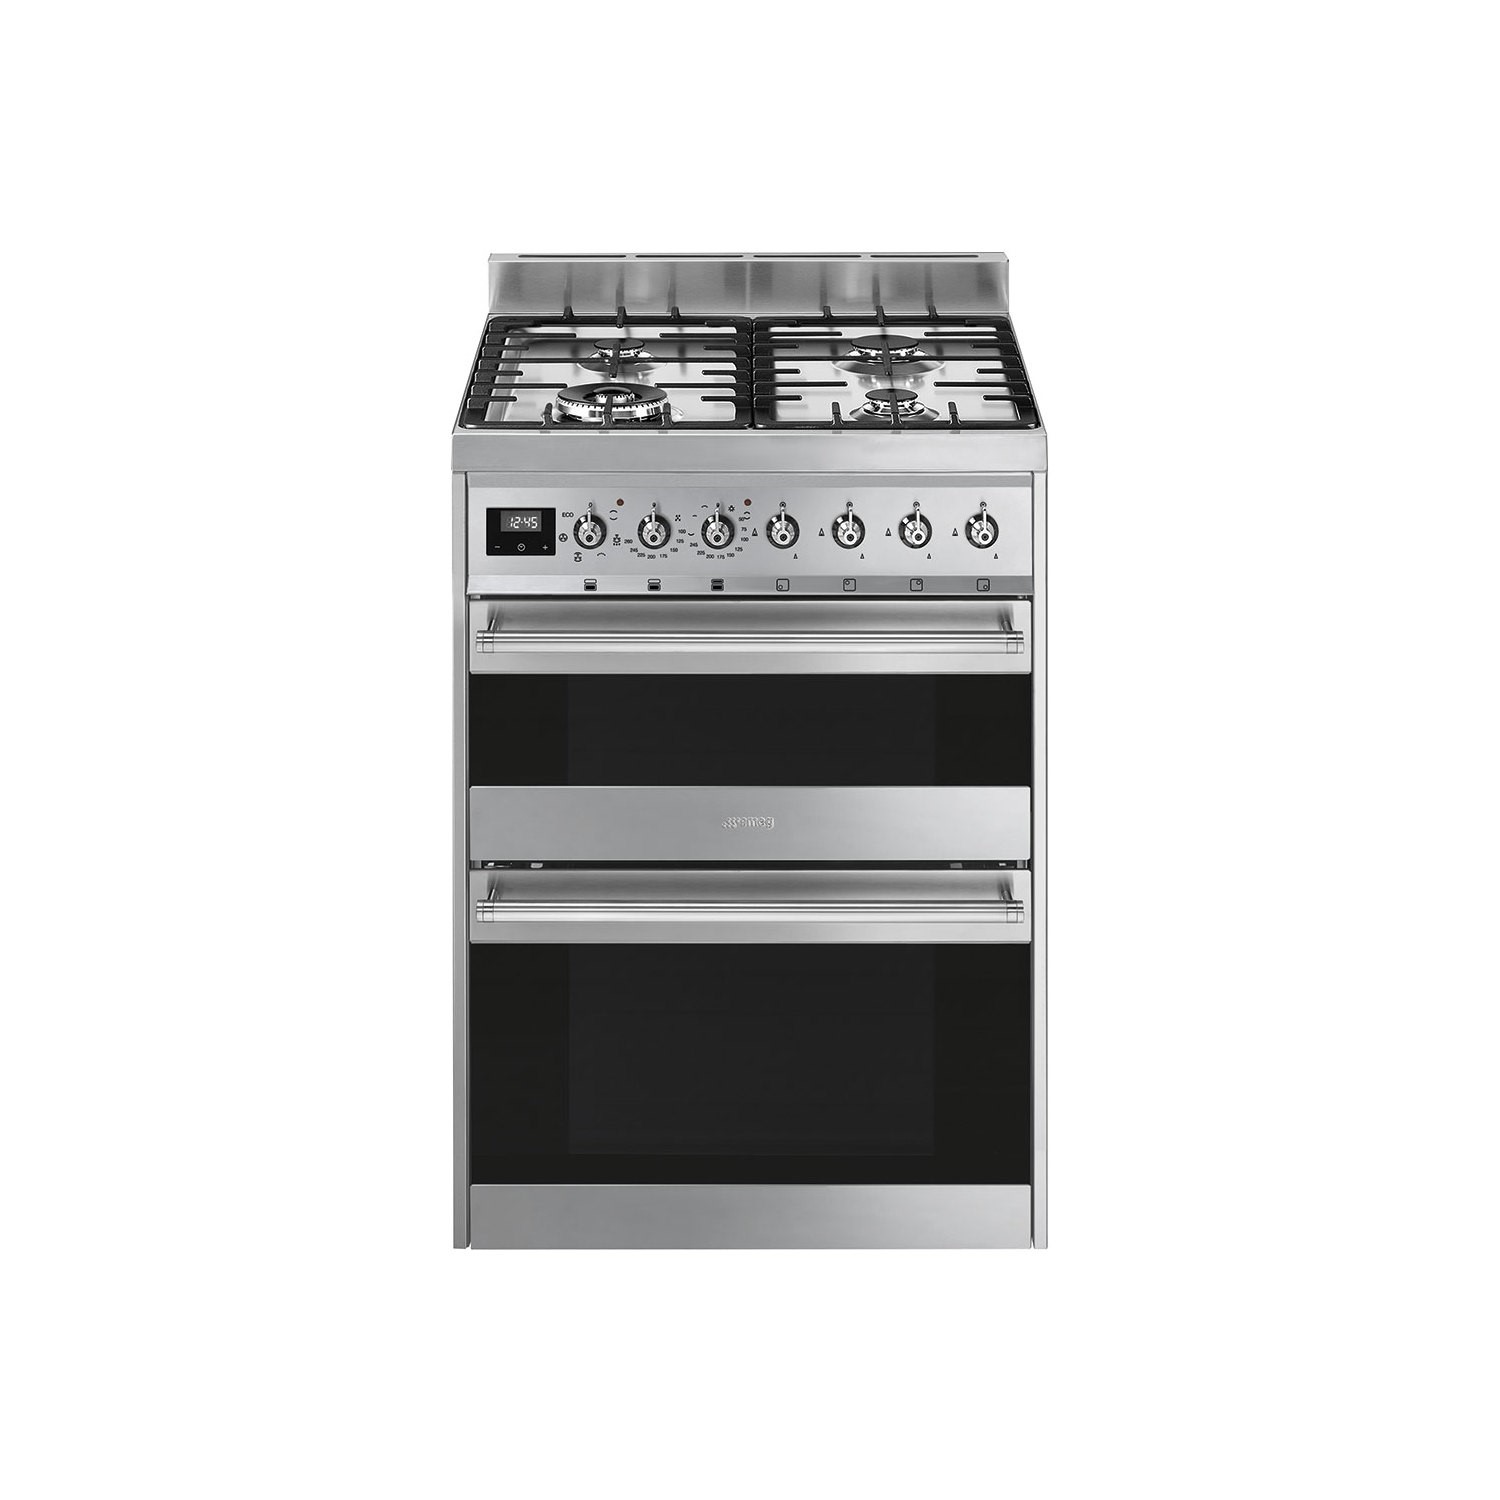 Smeg SY62MX9 Symphony Dual Cavity 60cm Dual Fuel Cooker Stainless Steel